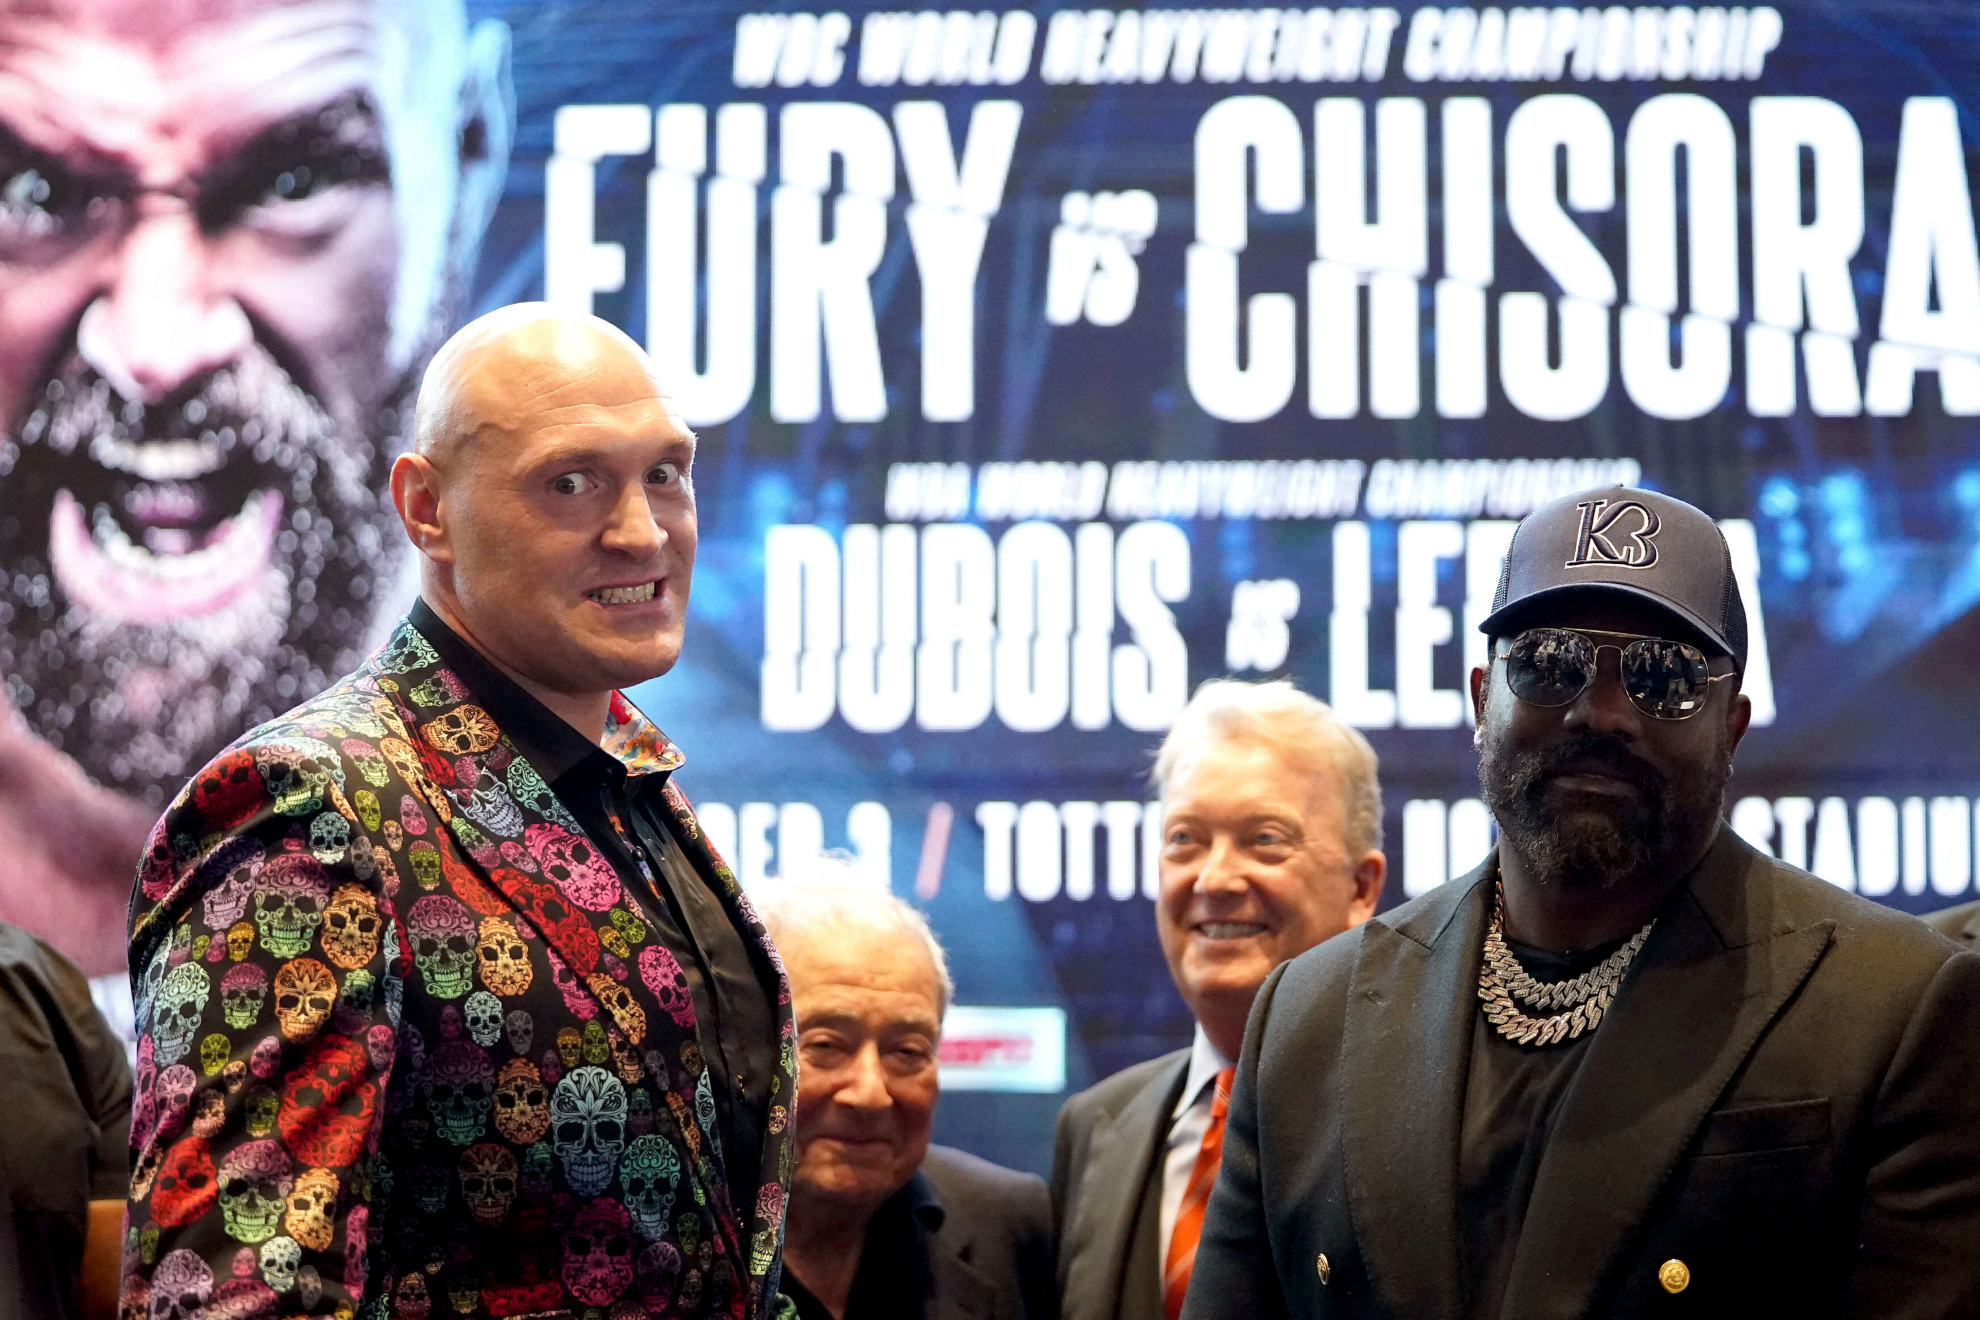 Tyson Fury and Derek Chisora during their opening press conference ahead of their December 3rd fight.